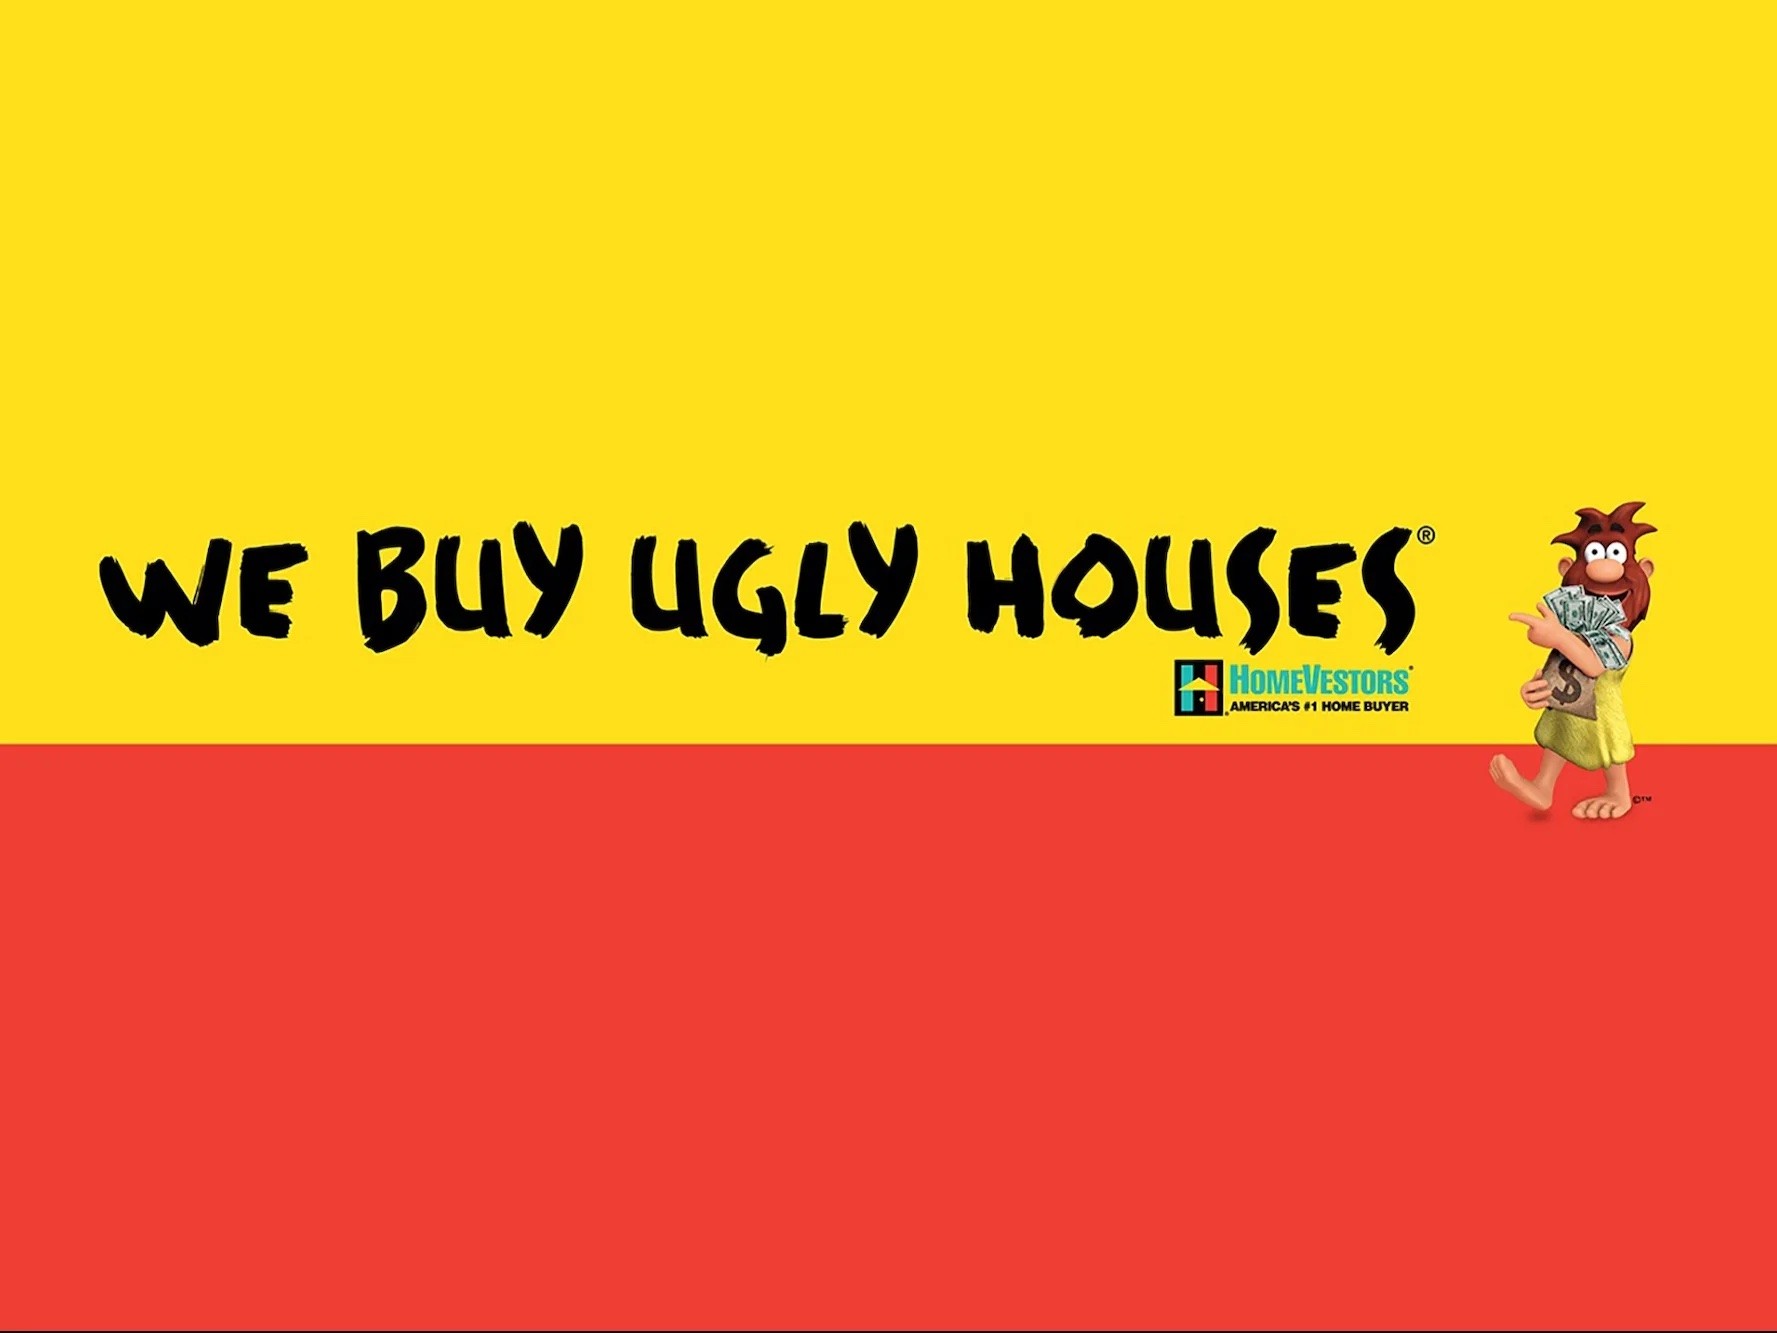 Behind the Scenes of a Deal With a “We Buy Ugly Houses” Franchise